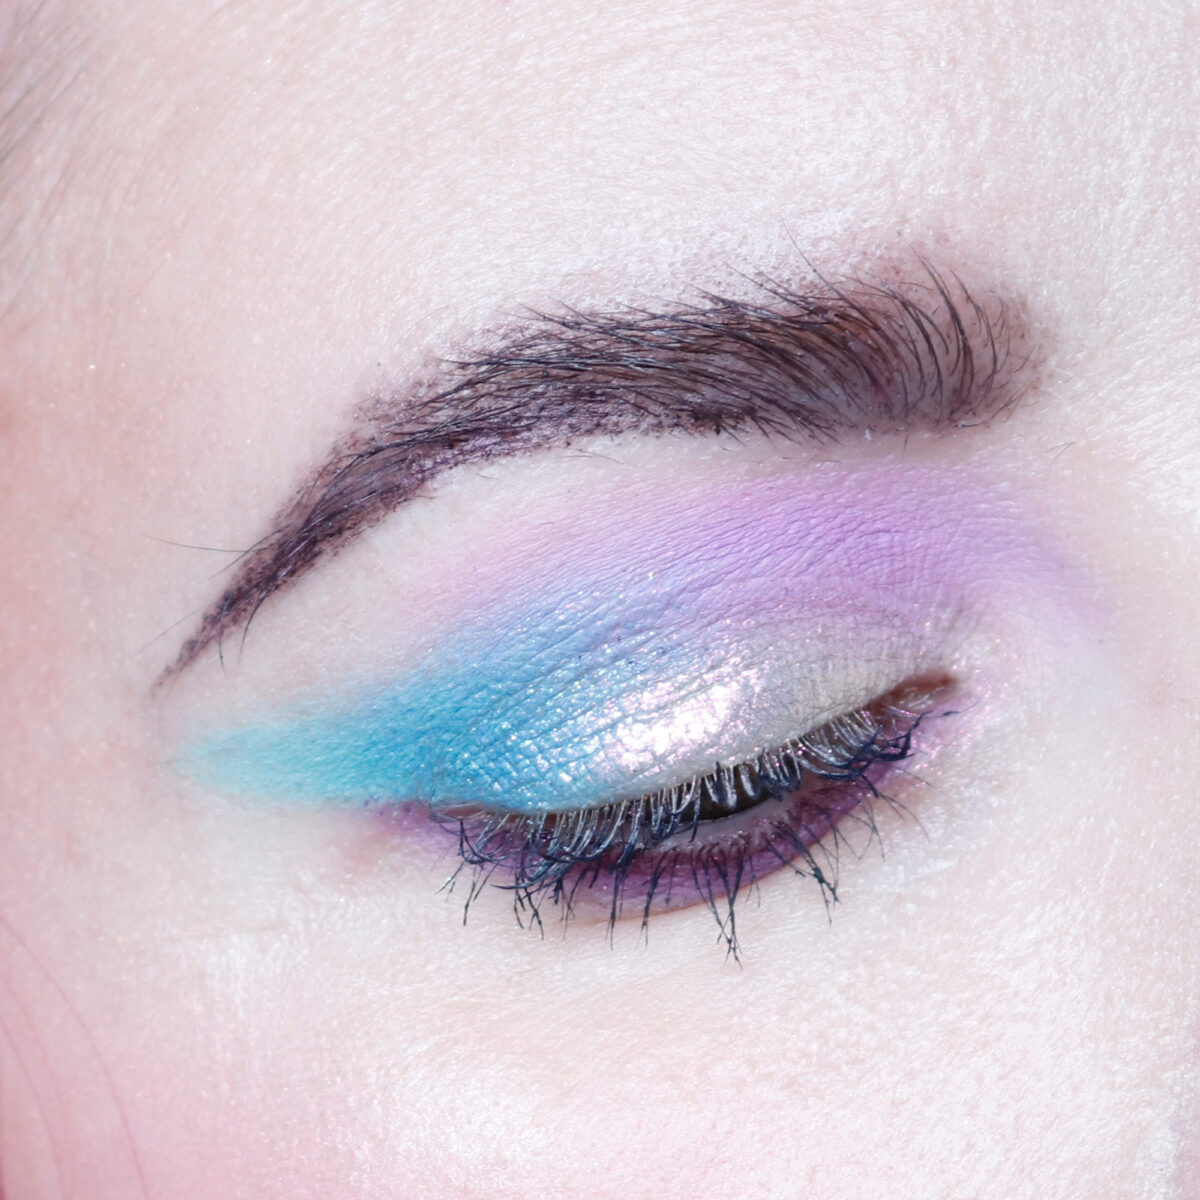 Fairy makeup inspiration by Cordelia of Phyrra